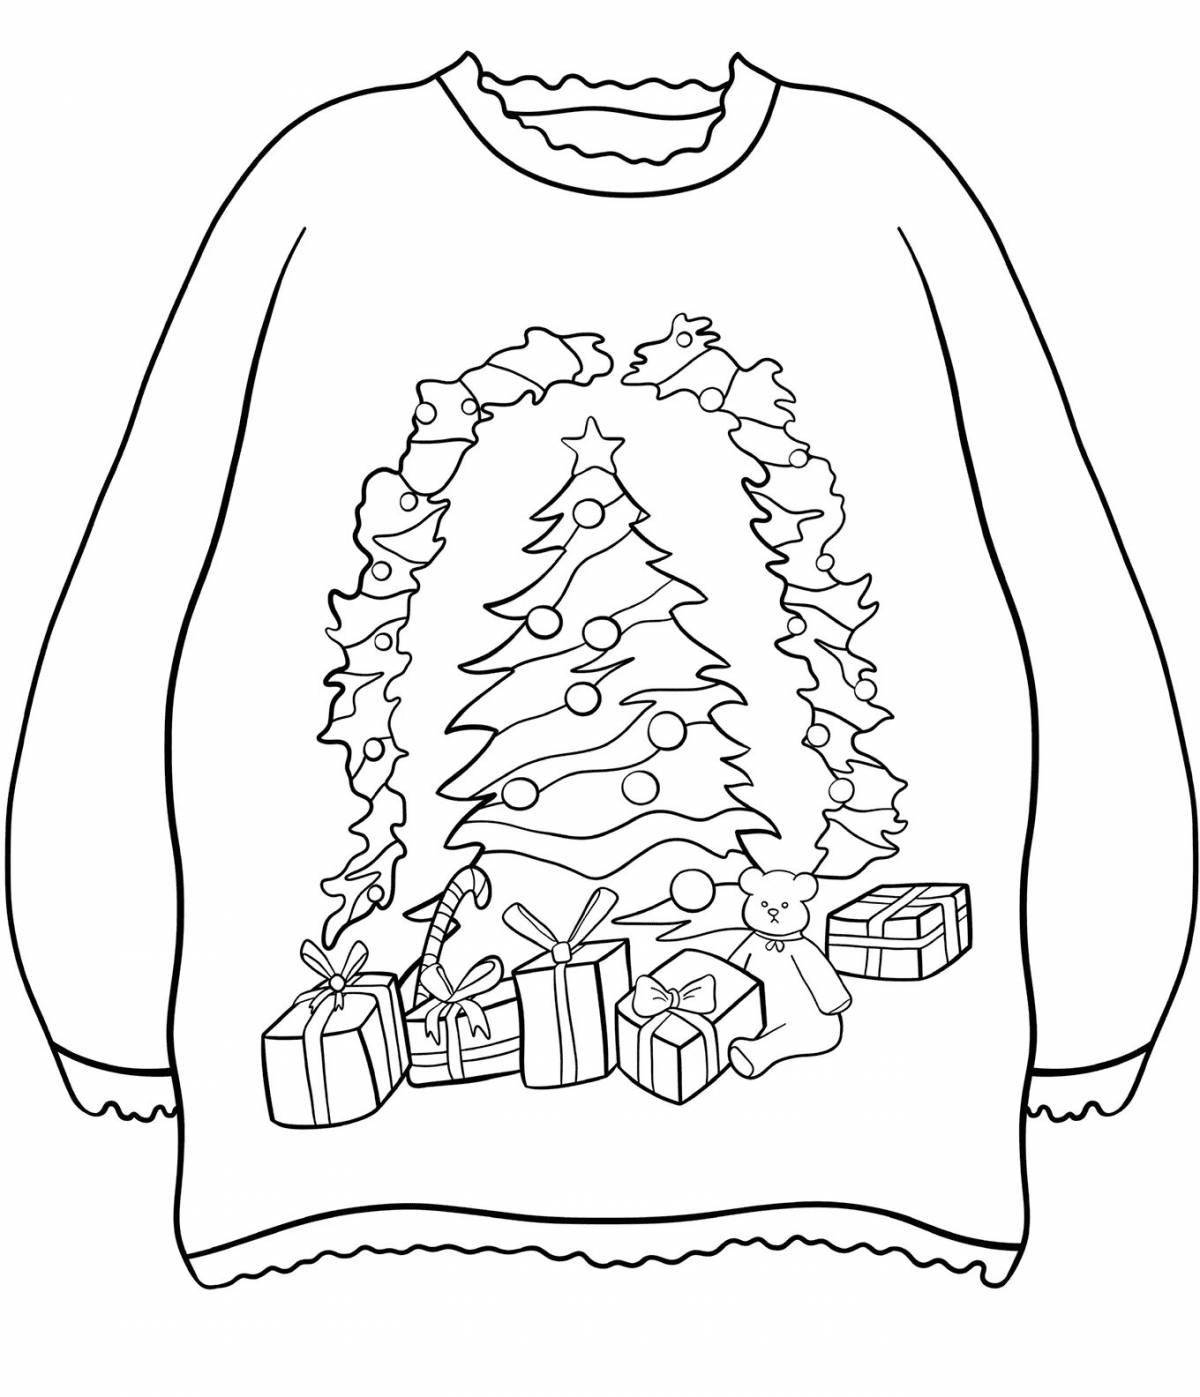 Charming jumper coloring page